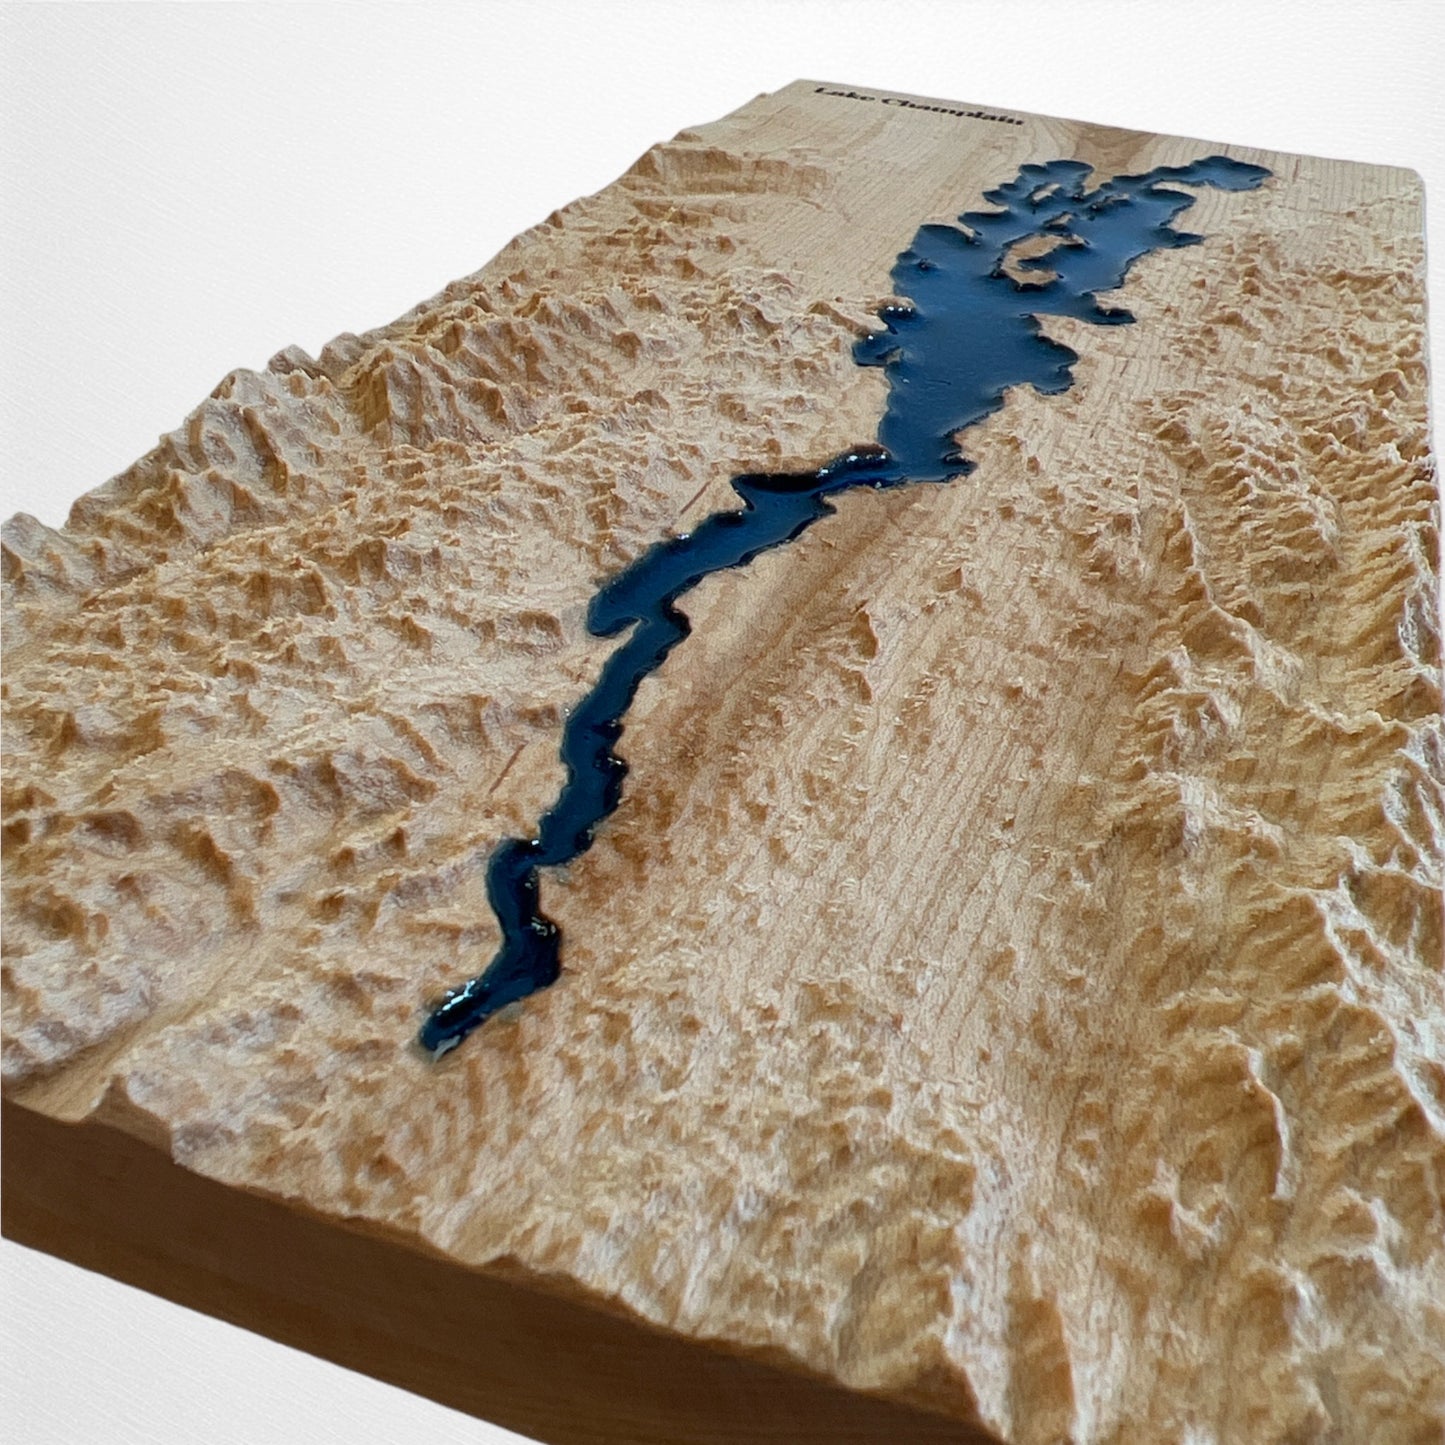 Lake Champlain 3D Relief Map | Lake Champlain Wood Epoxy Art | New York | Vermont | Aerial View Lake Map | Gift for Husband | Travel Gift